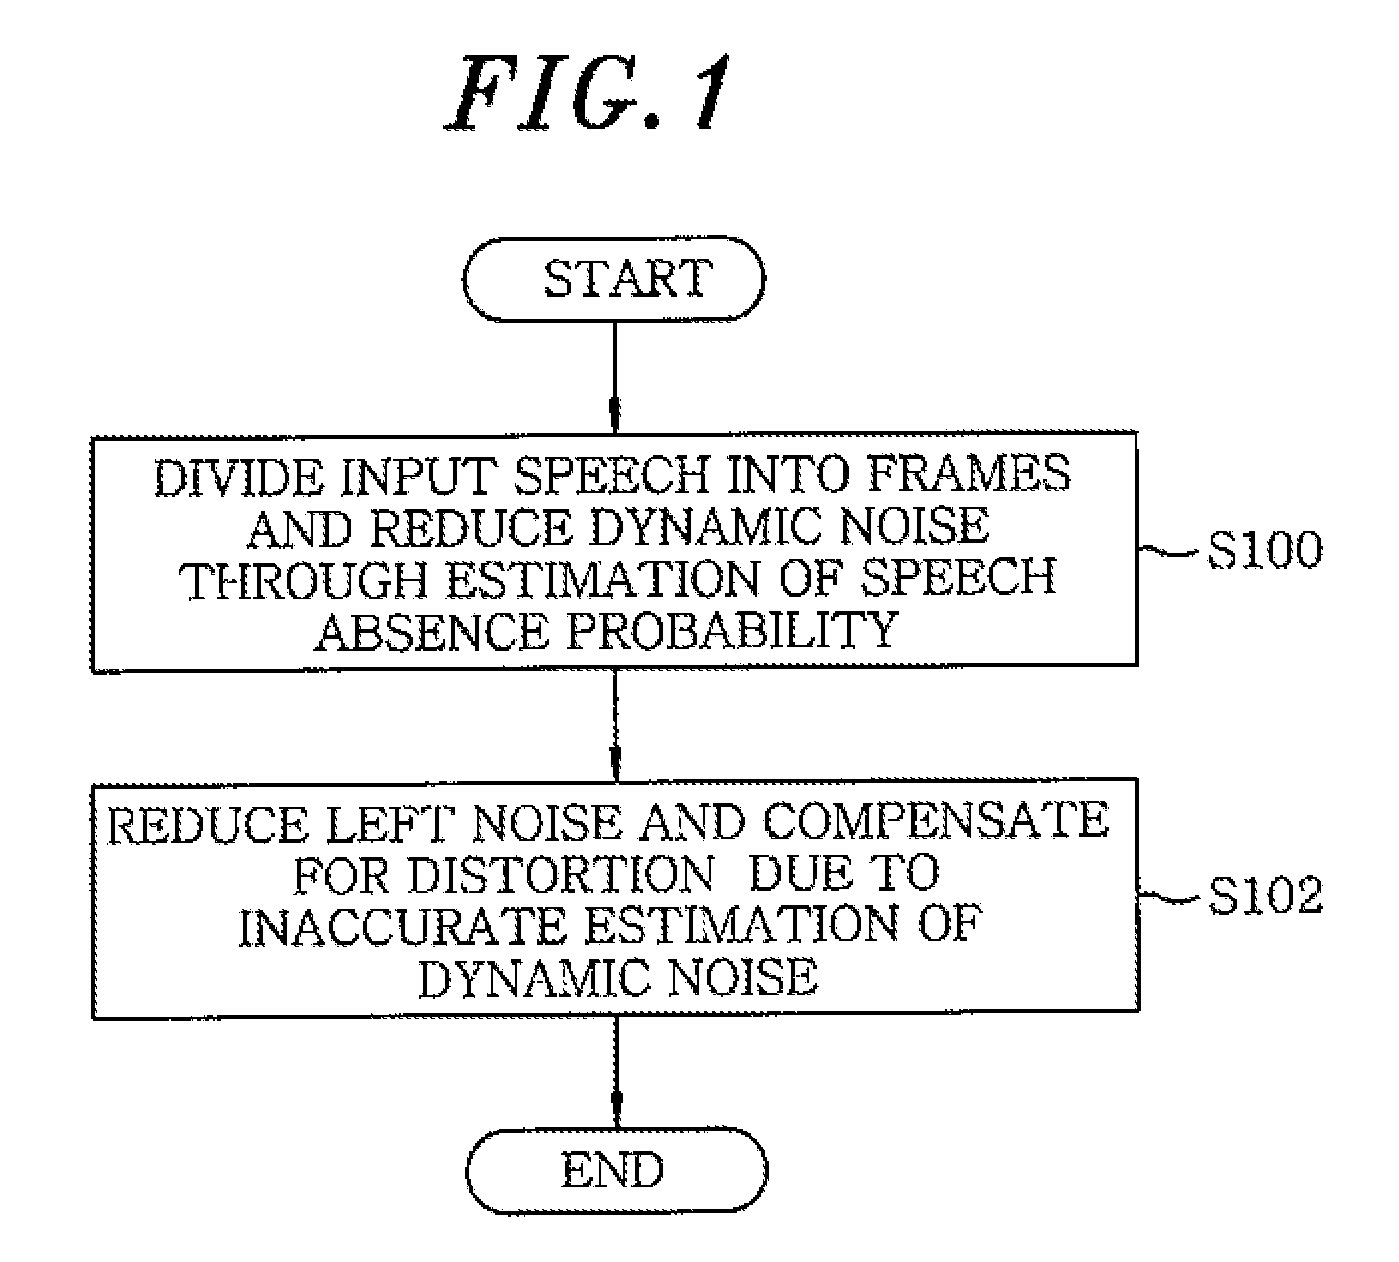 Model-based distortion compensating noise reduction apparatus and method for speech recognition